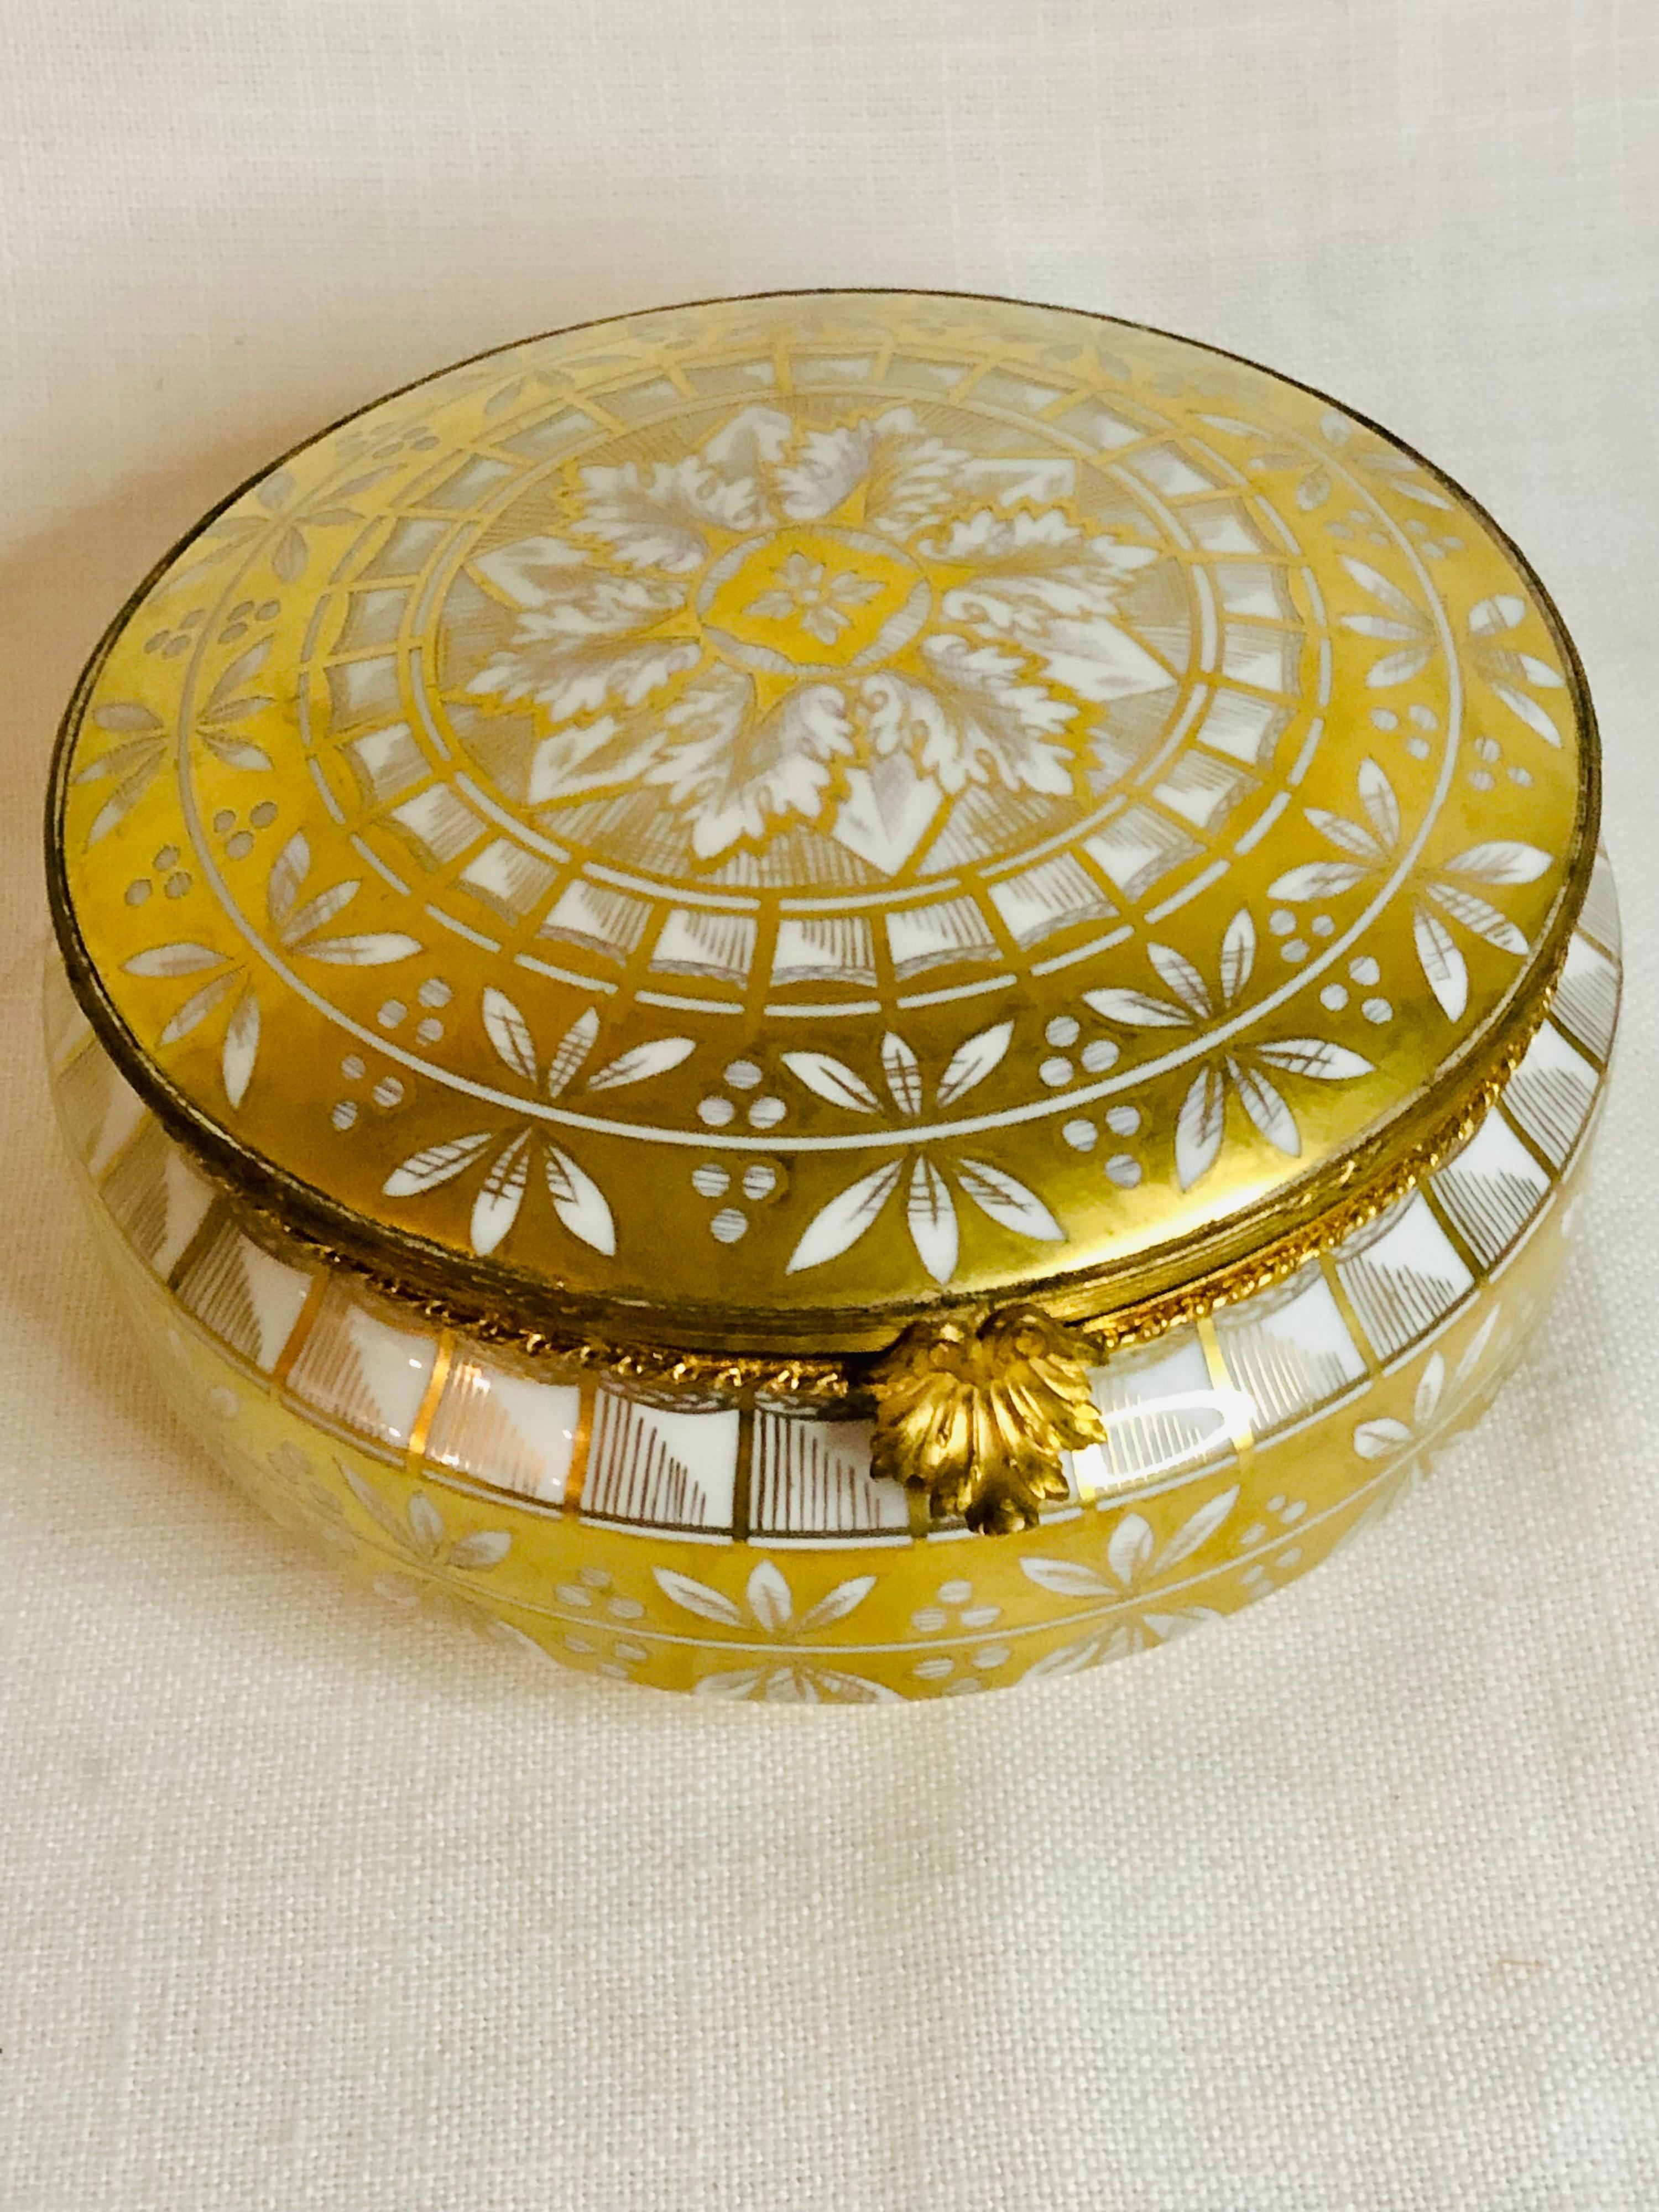 Le Tallec Porcelain Box with Gold Painted Decoration on a White Porcelain Ground 4